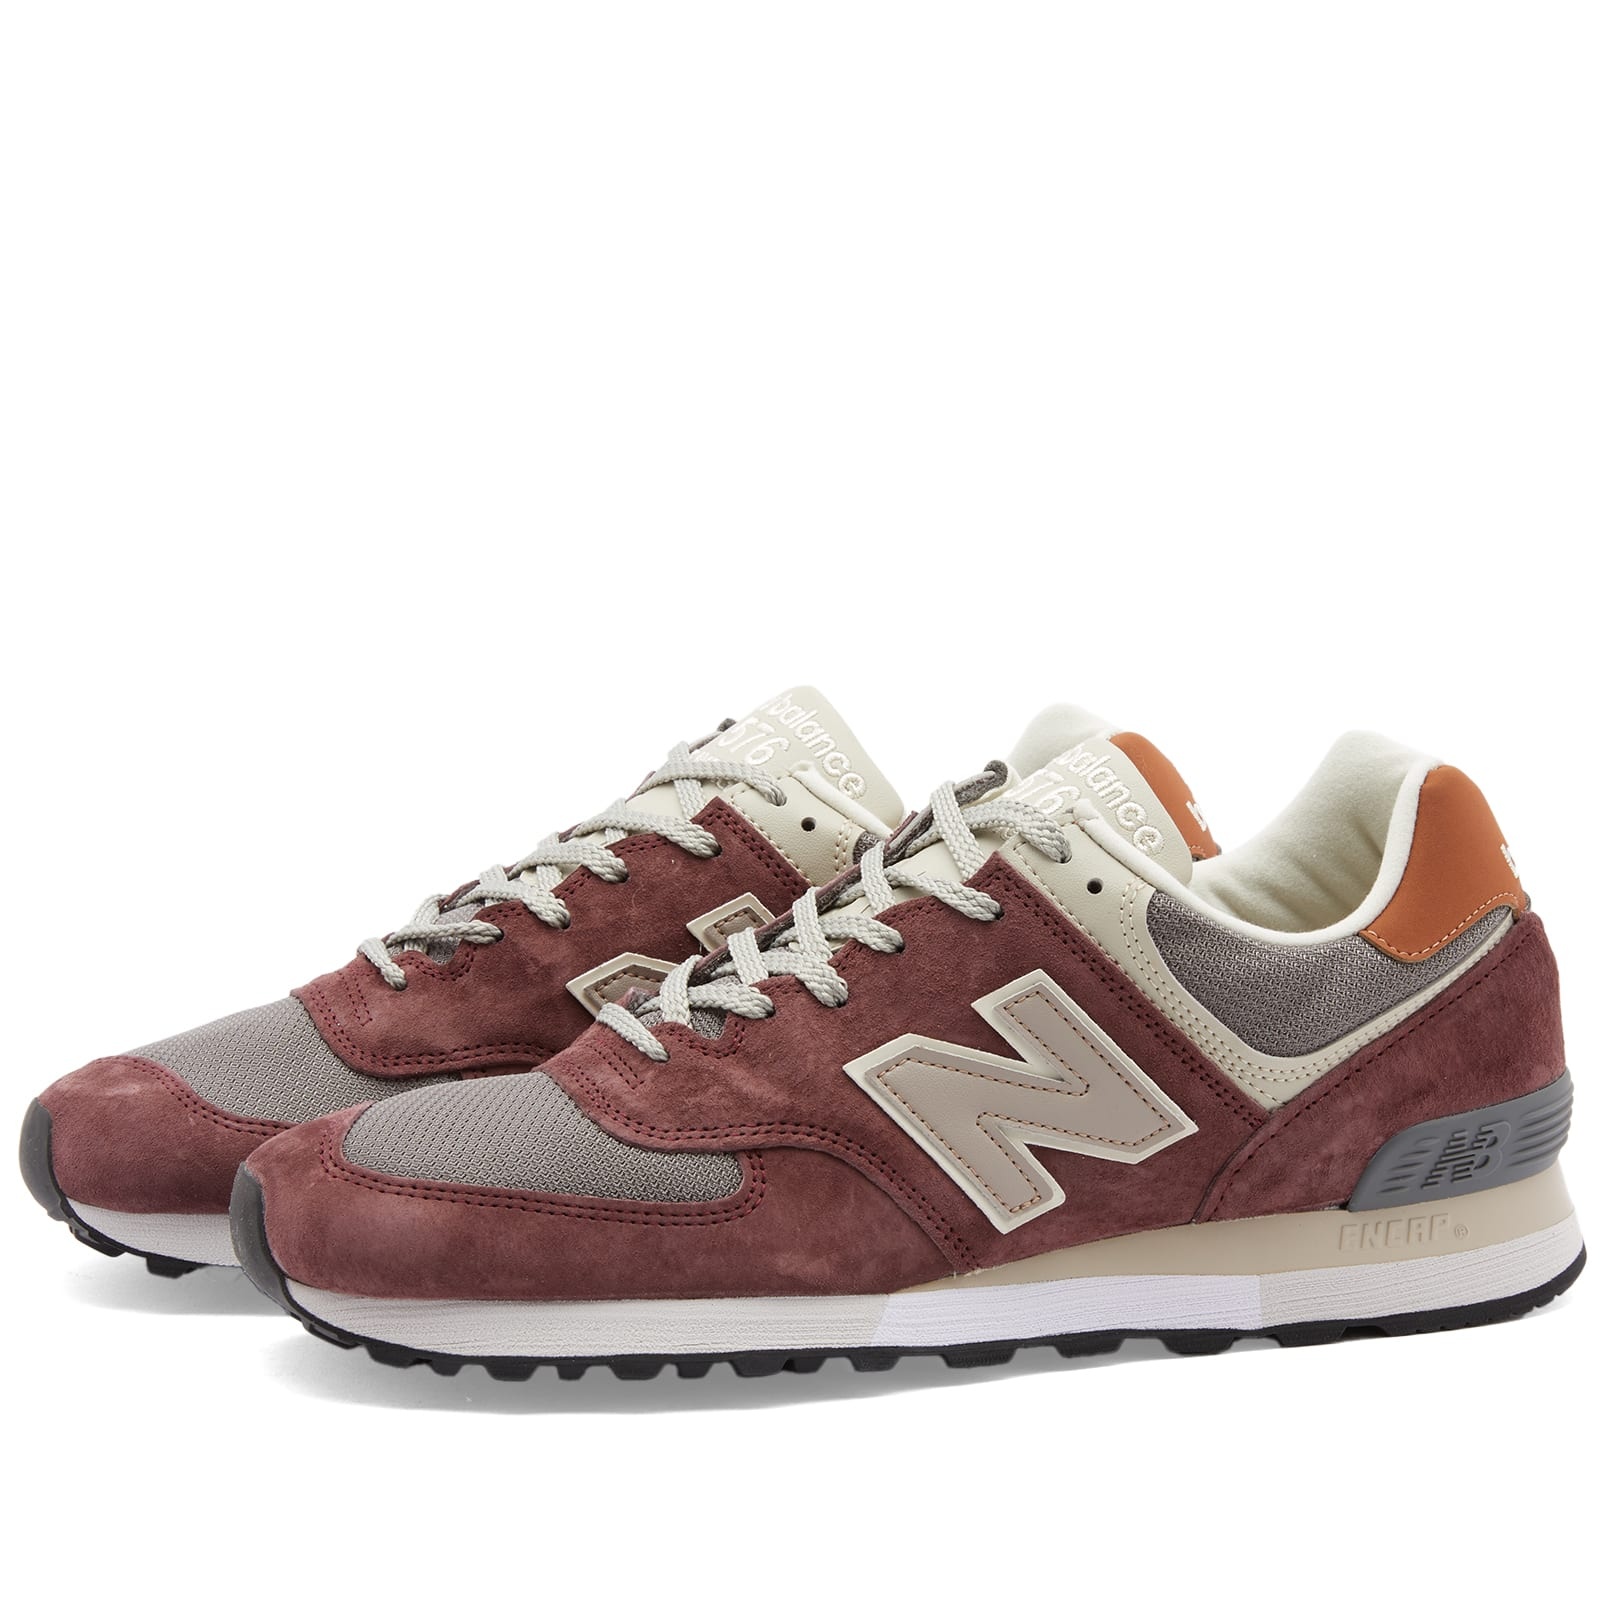 New Balance OU576PTY - Made in UK - 1